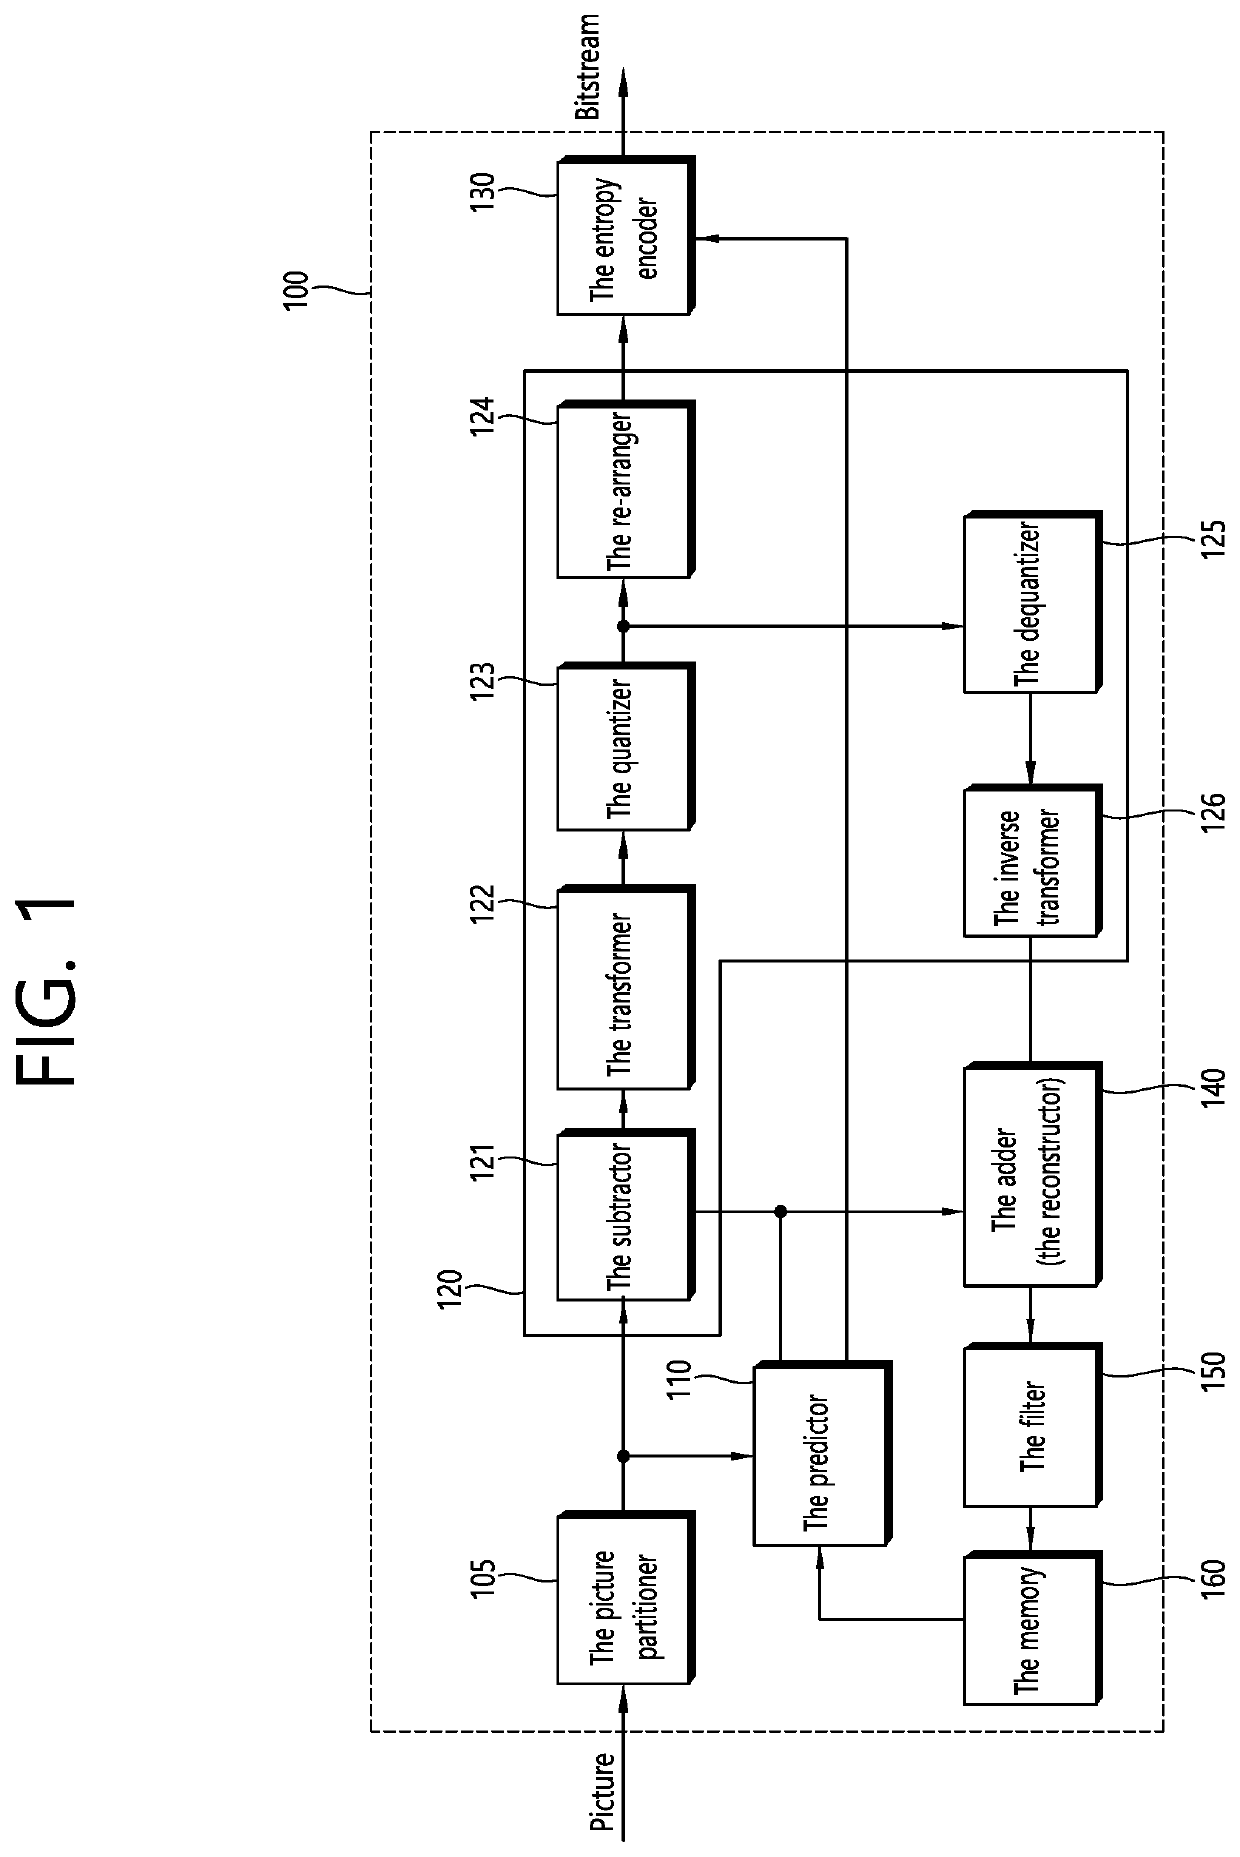 Image decoding method and apparatus based on affine motion prediction in image coding system